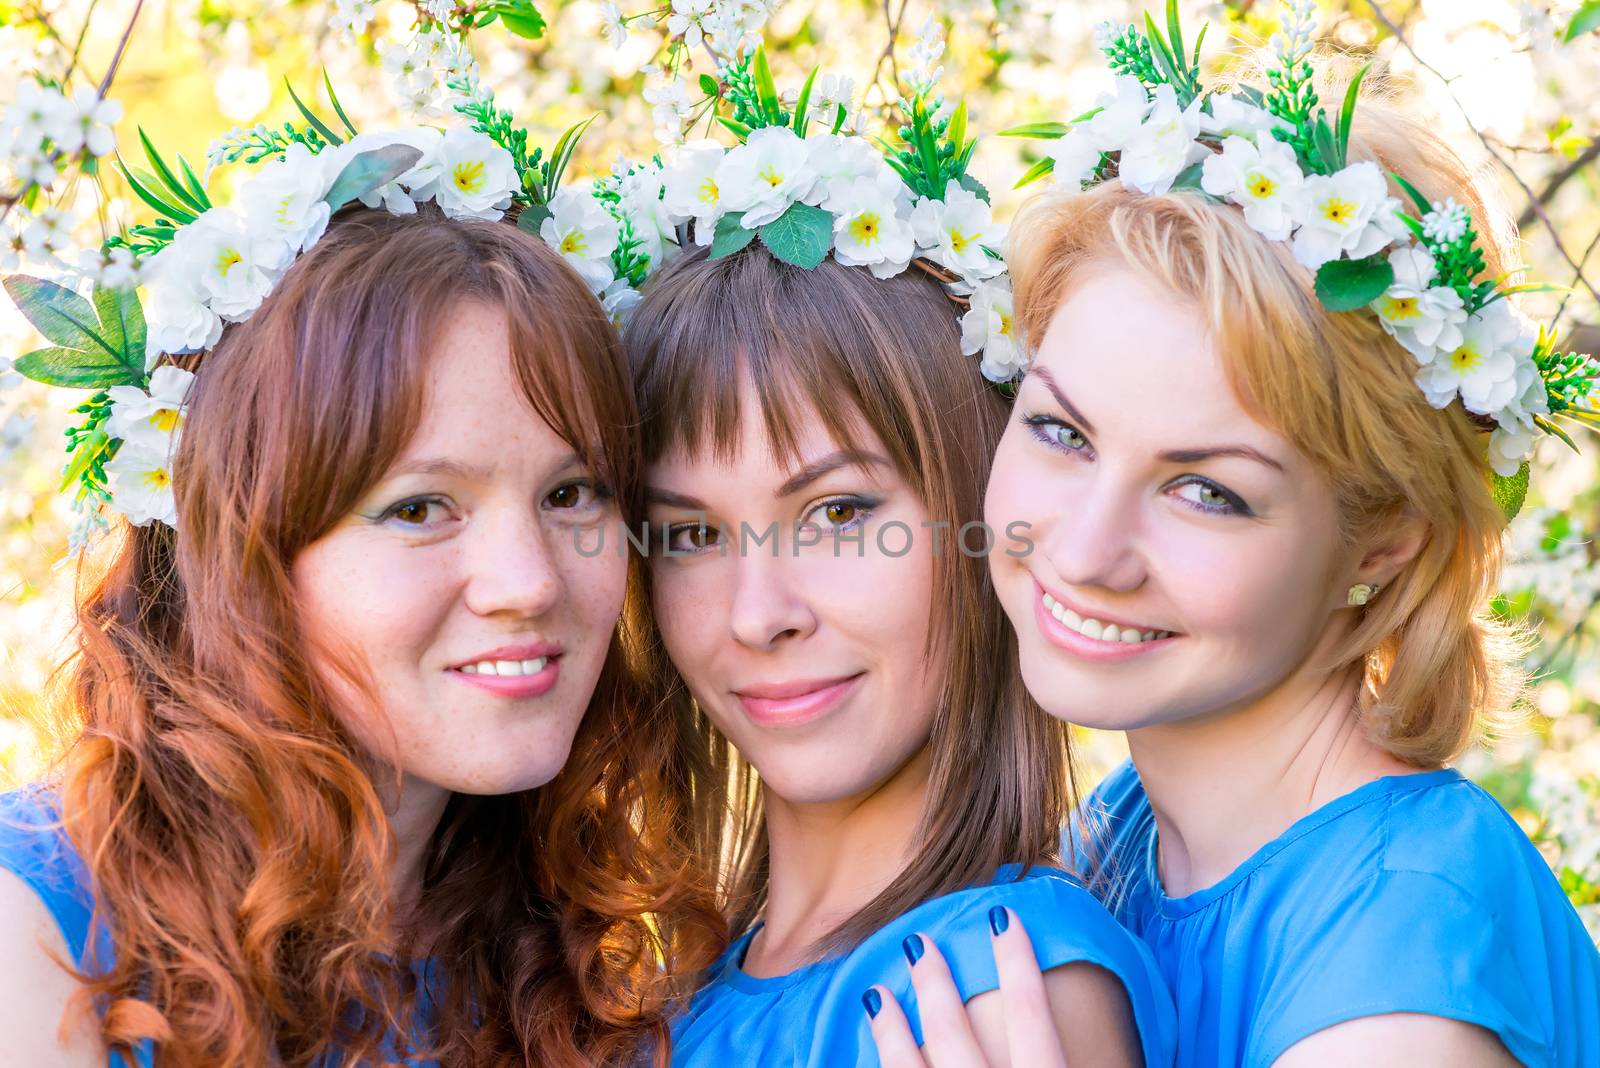 Three girls 30 years with wreaths on the head in the flowered ga by kosmsos111